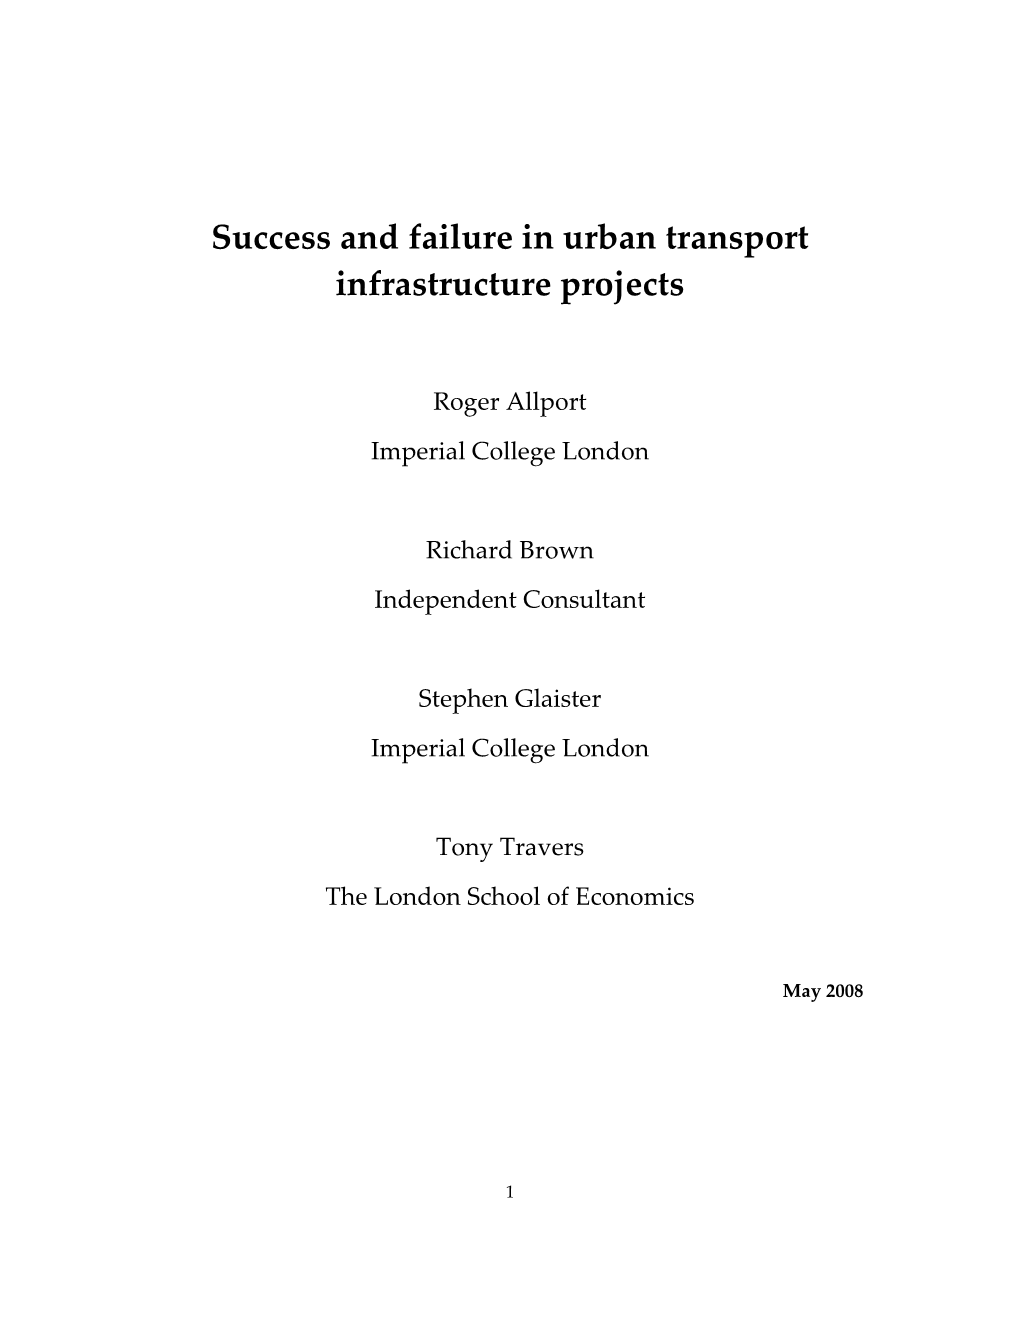 Success and Failure in Urban Transport Infrastructure Projects